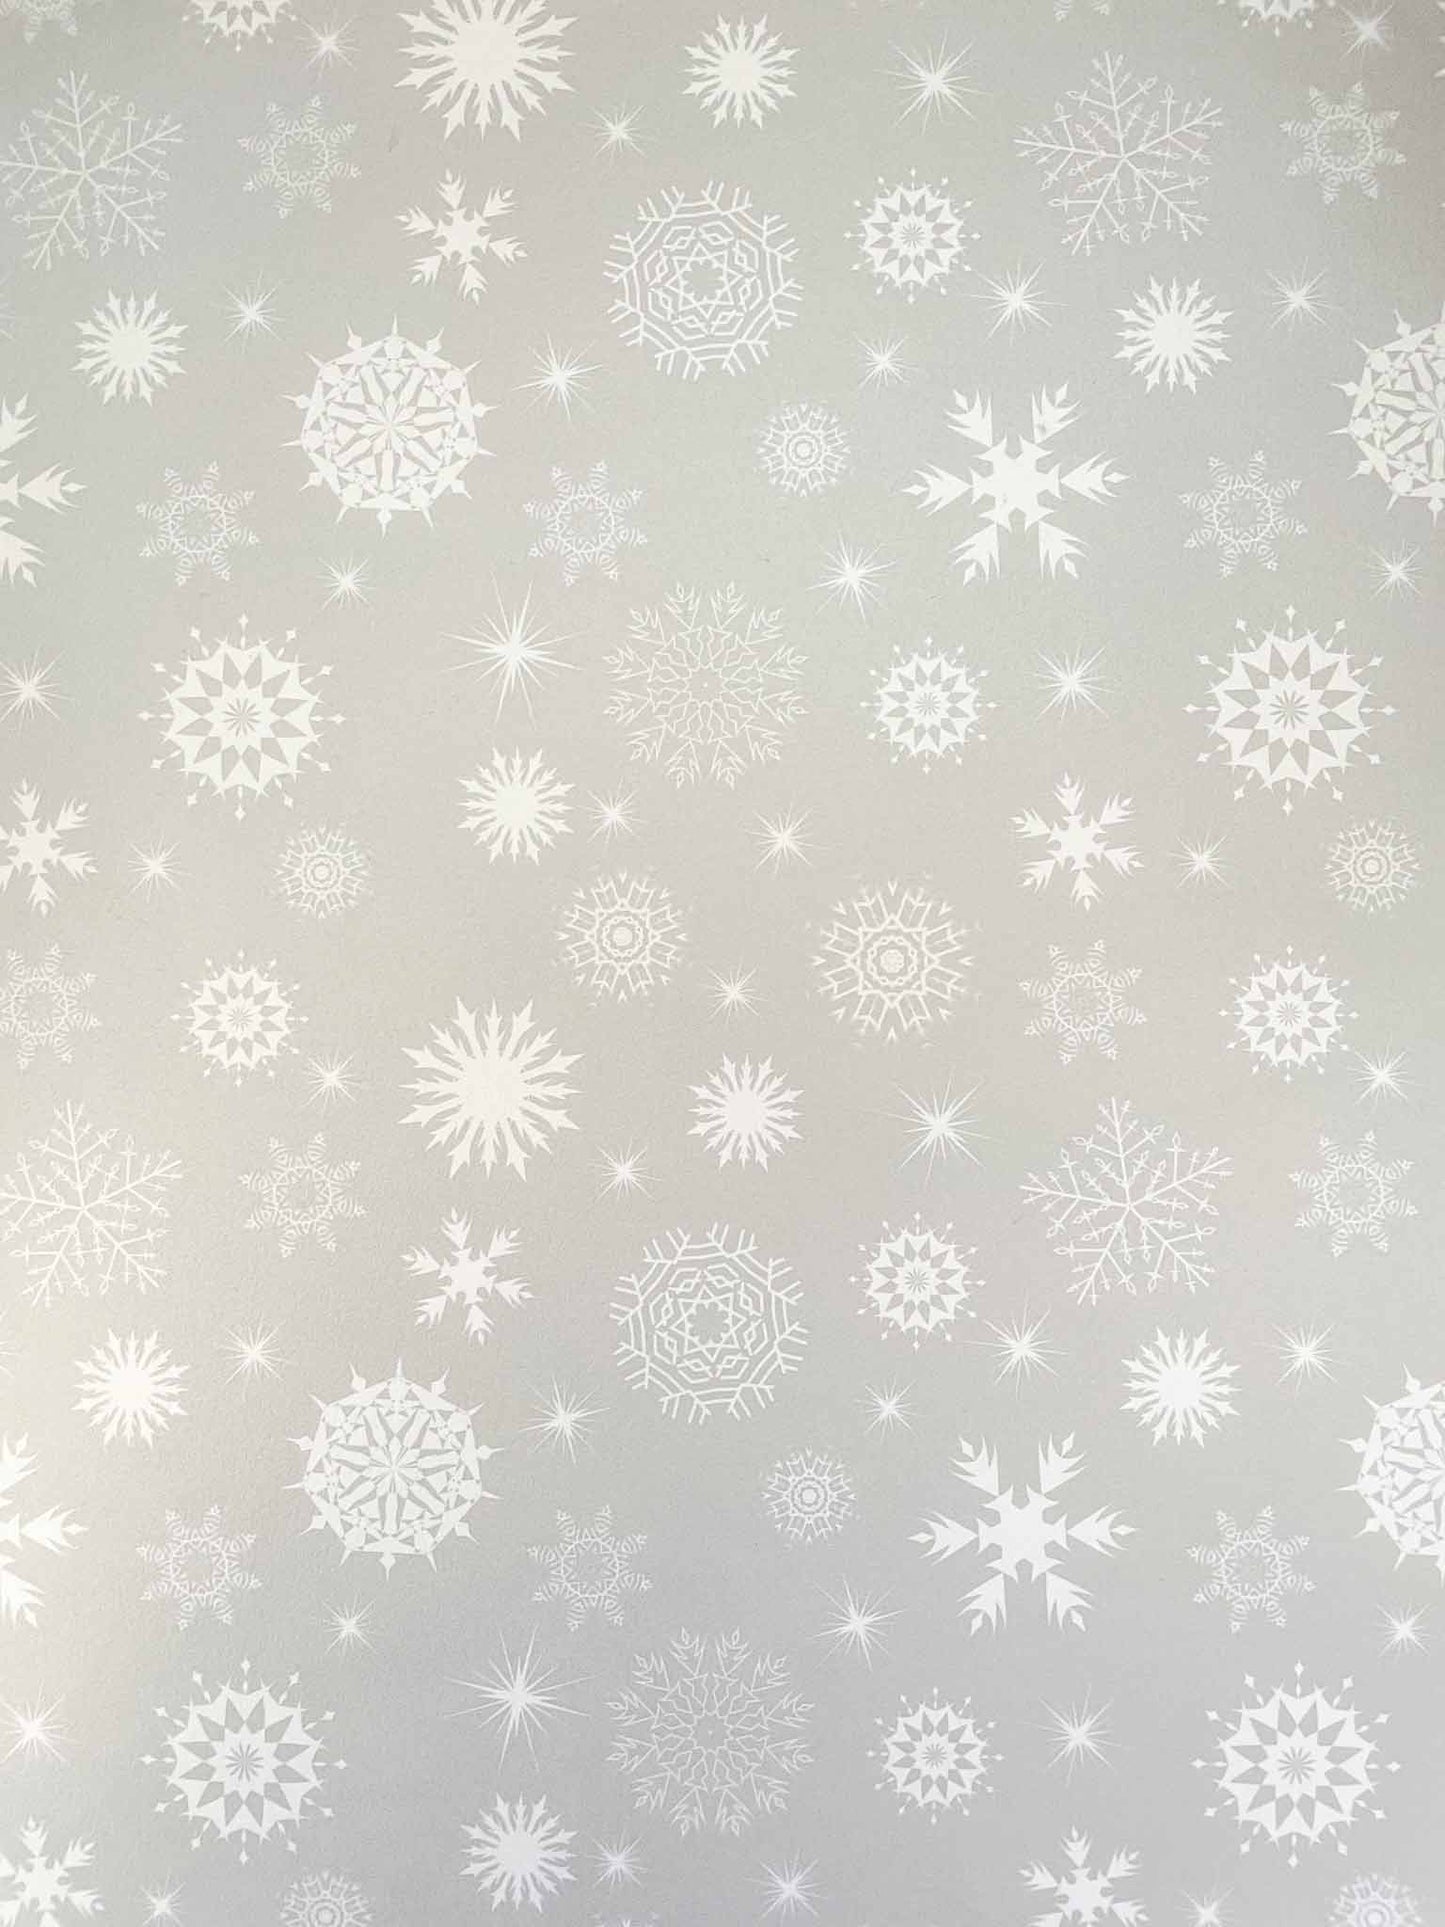 ice-maiden-silver-snowflake-print-patterned-paper